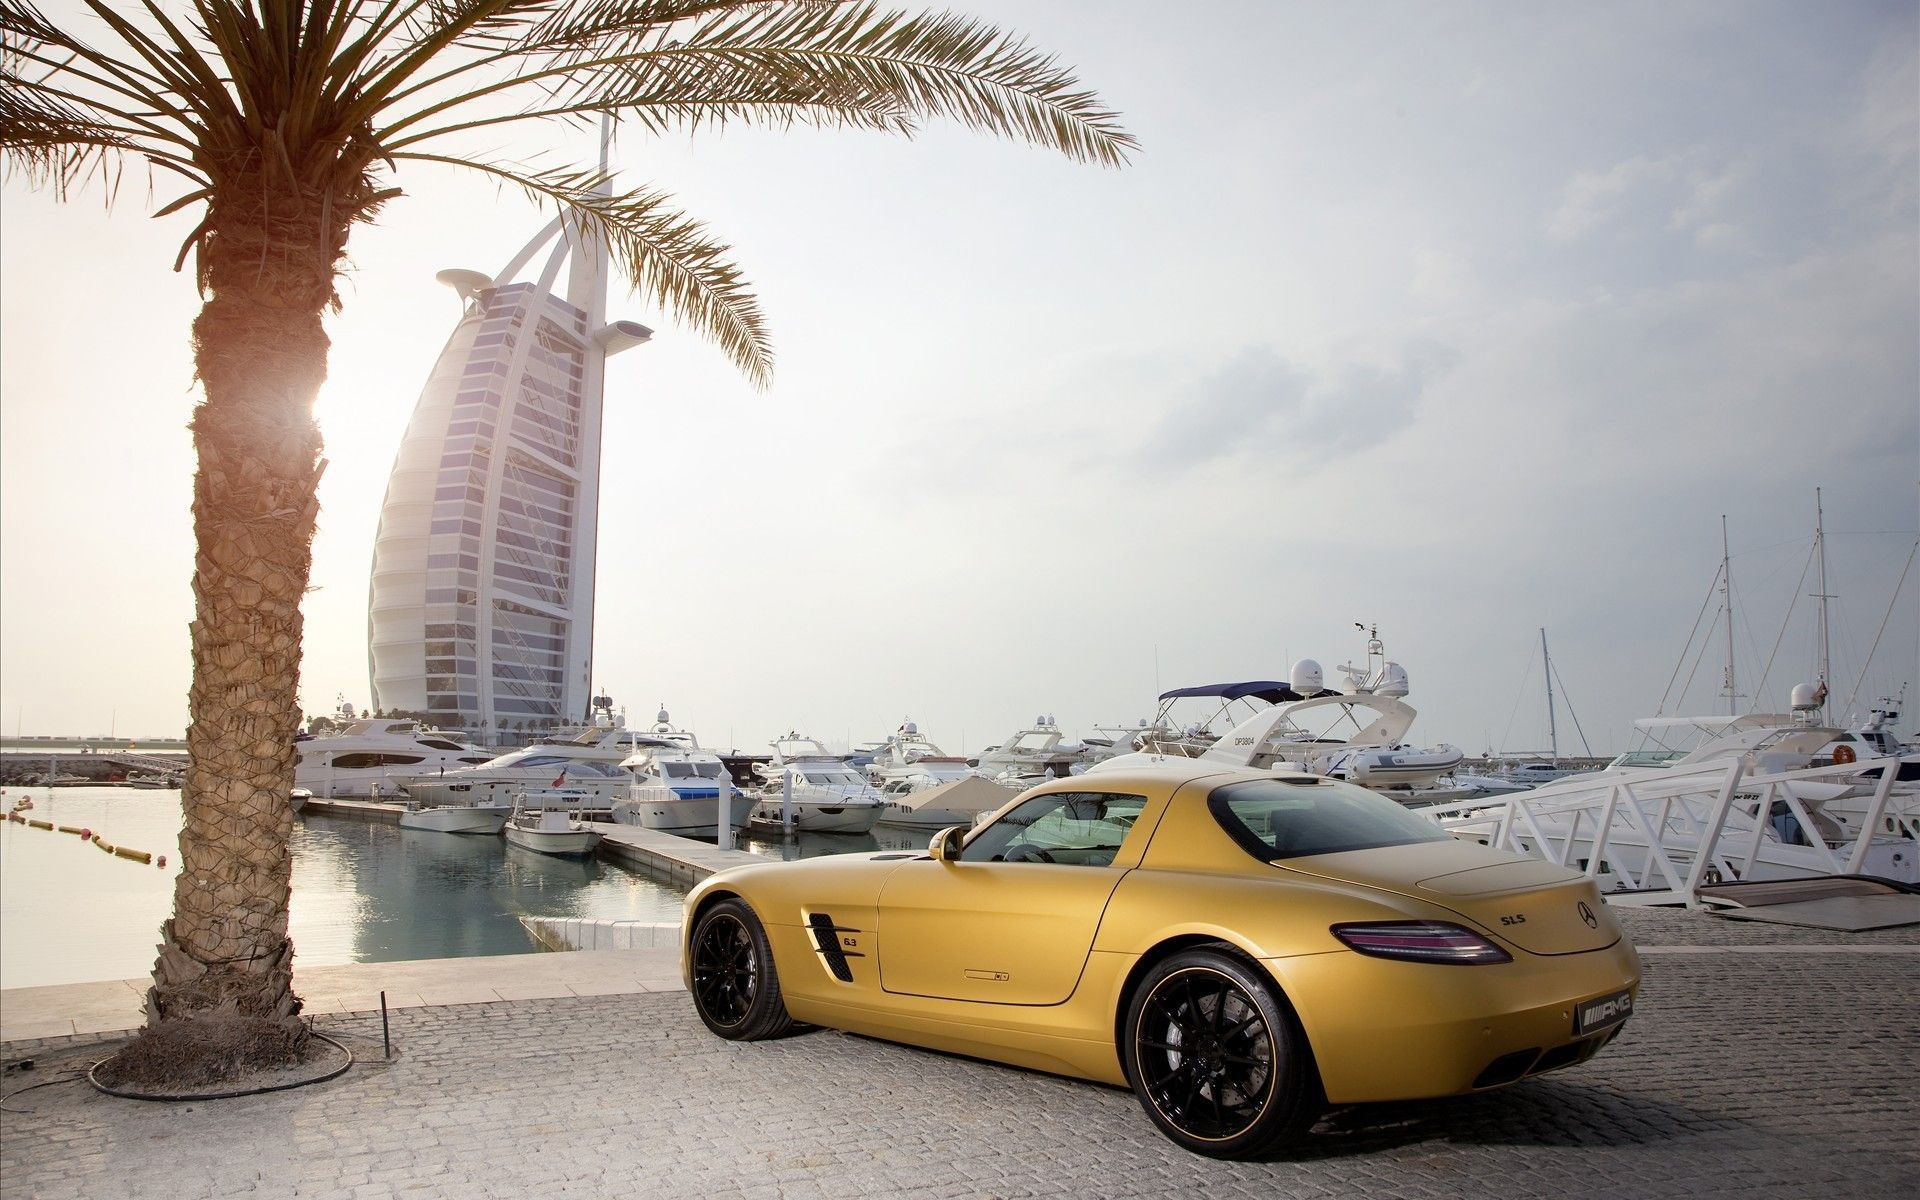 Rules, Regulations and Fees for Obtaining a Driving License in Dubai